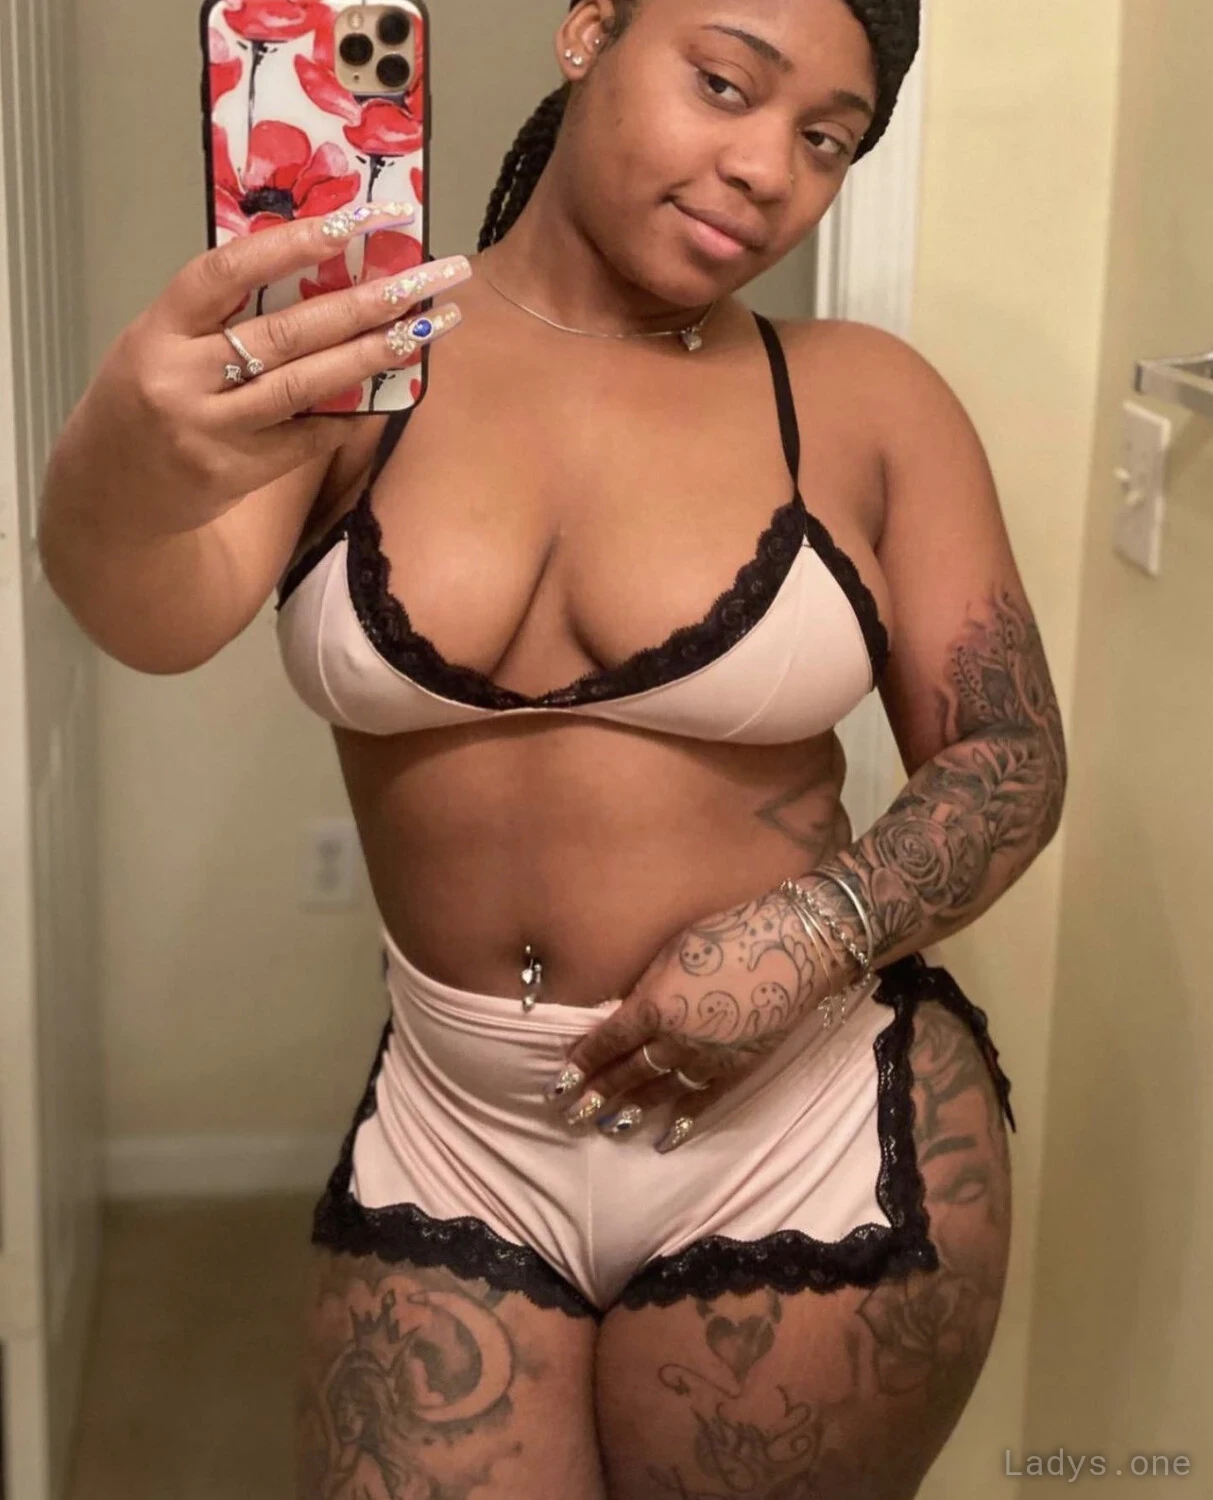 Tammy beatride, 28 years old Fayetteville escort girl with big tits, height 125 sm, Weight 42 kg